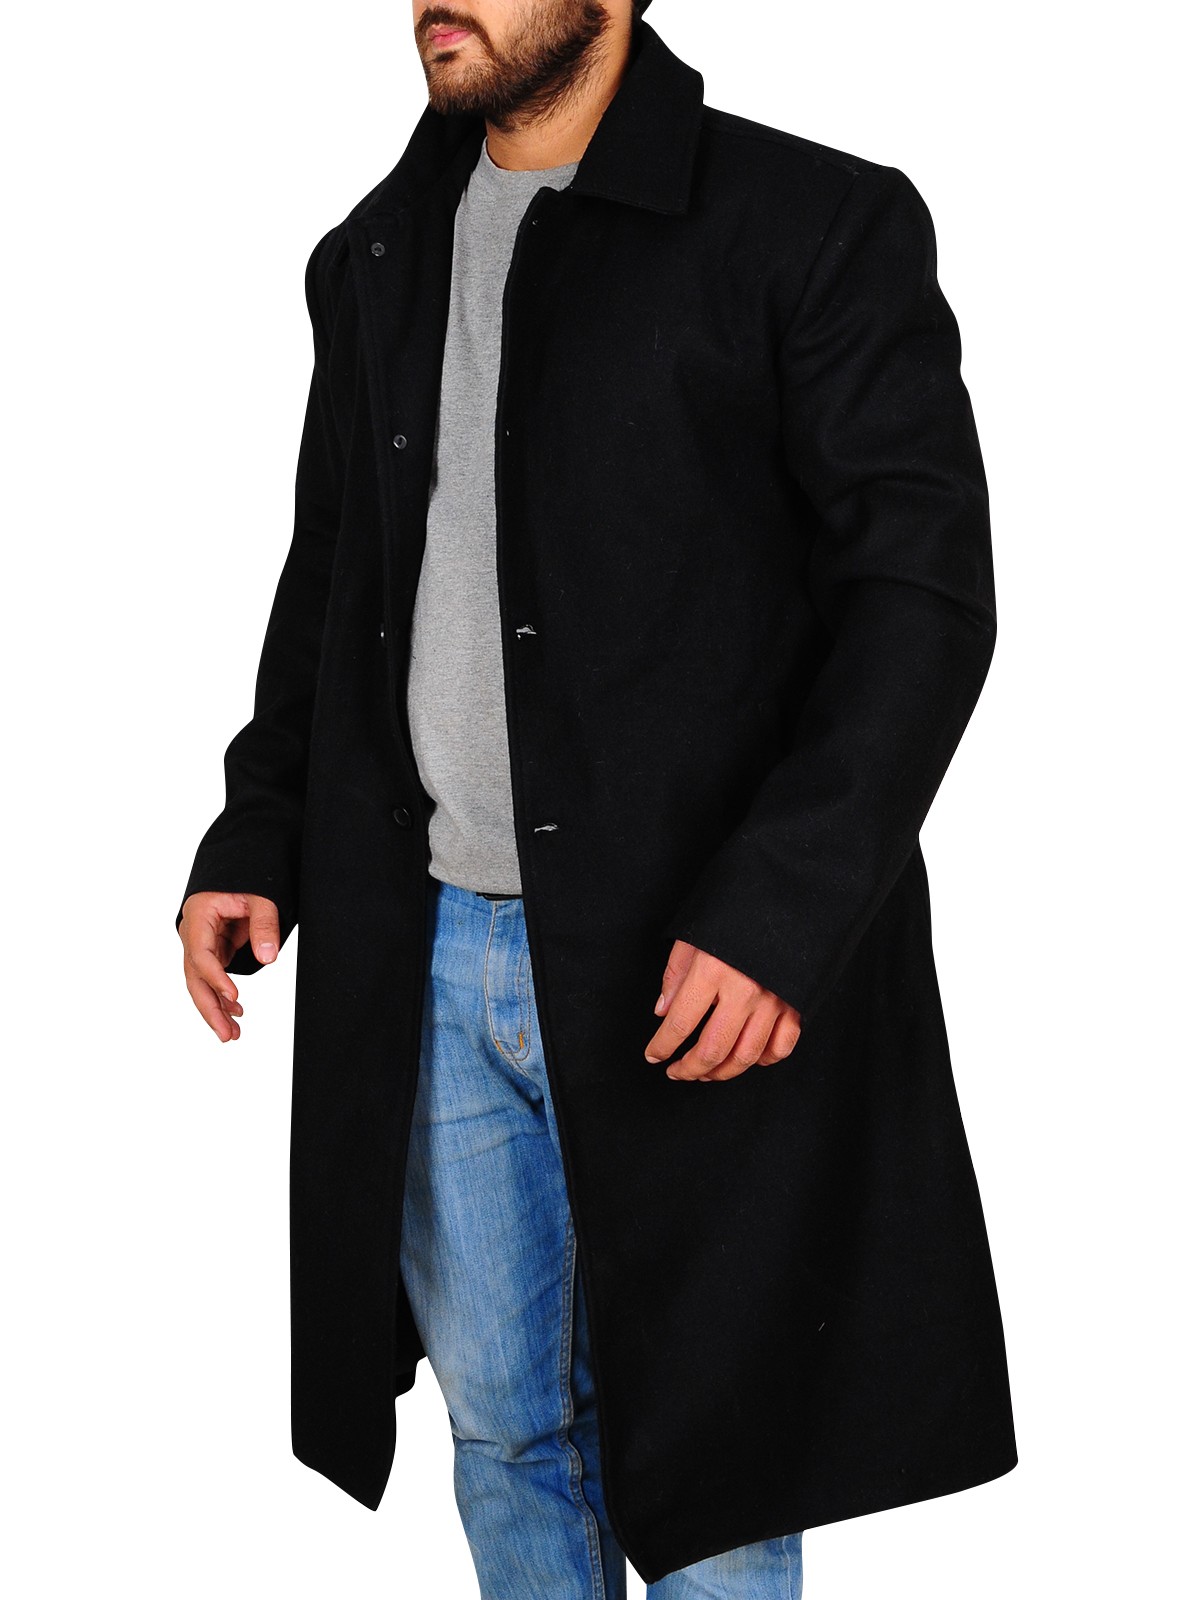 Justified Raylan Givens Trench Coat - Right Jackets